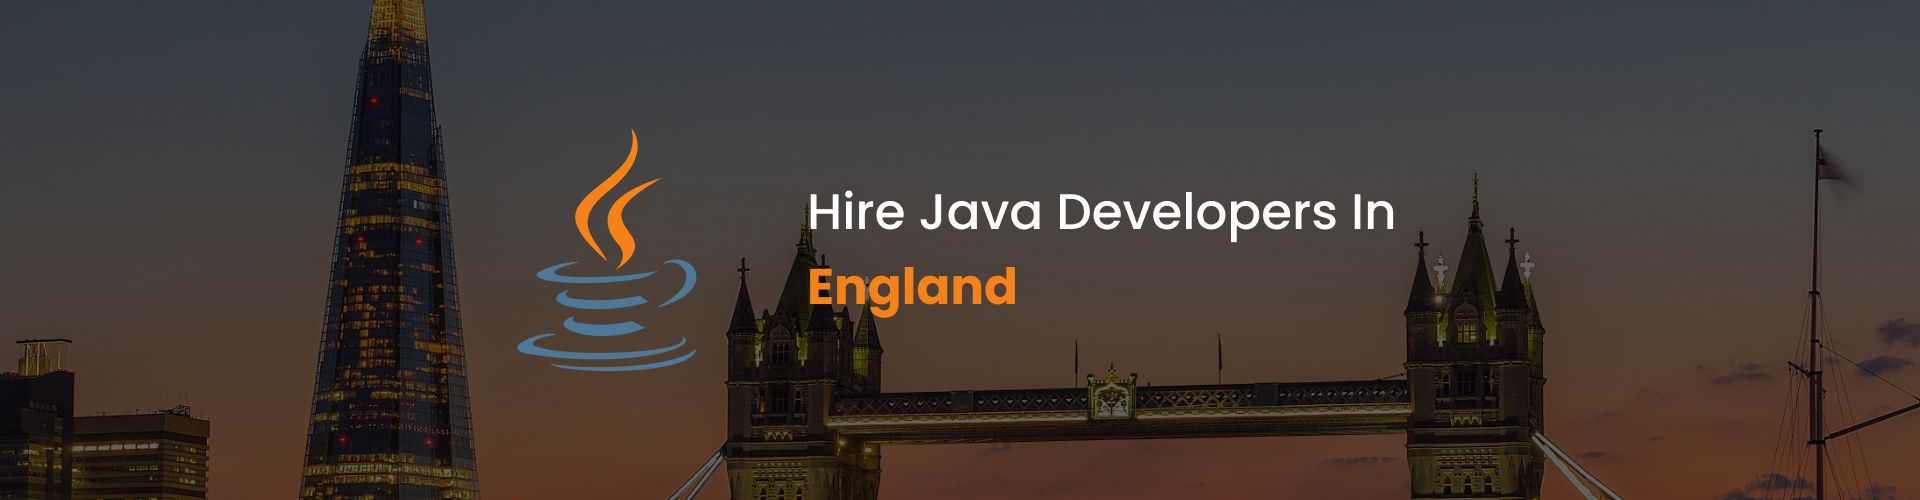 hire java developers in england